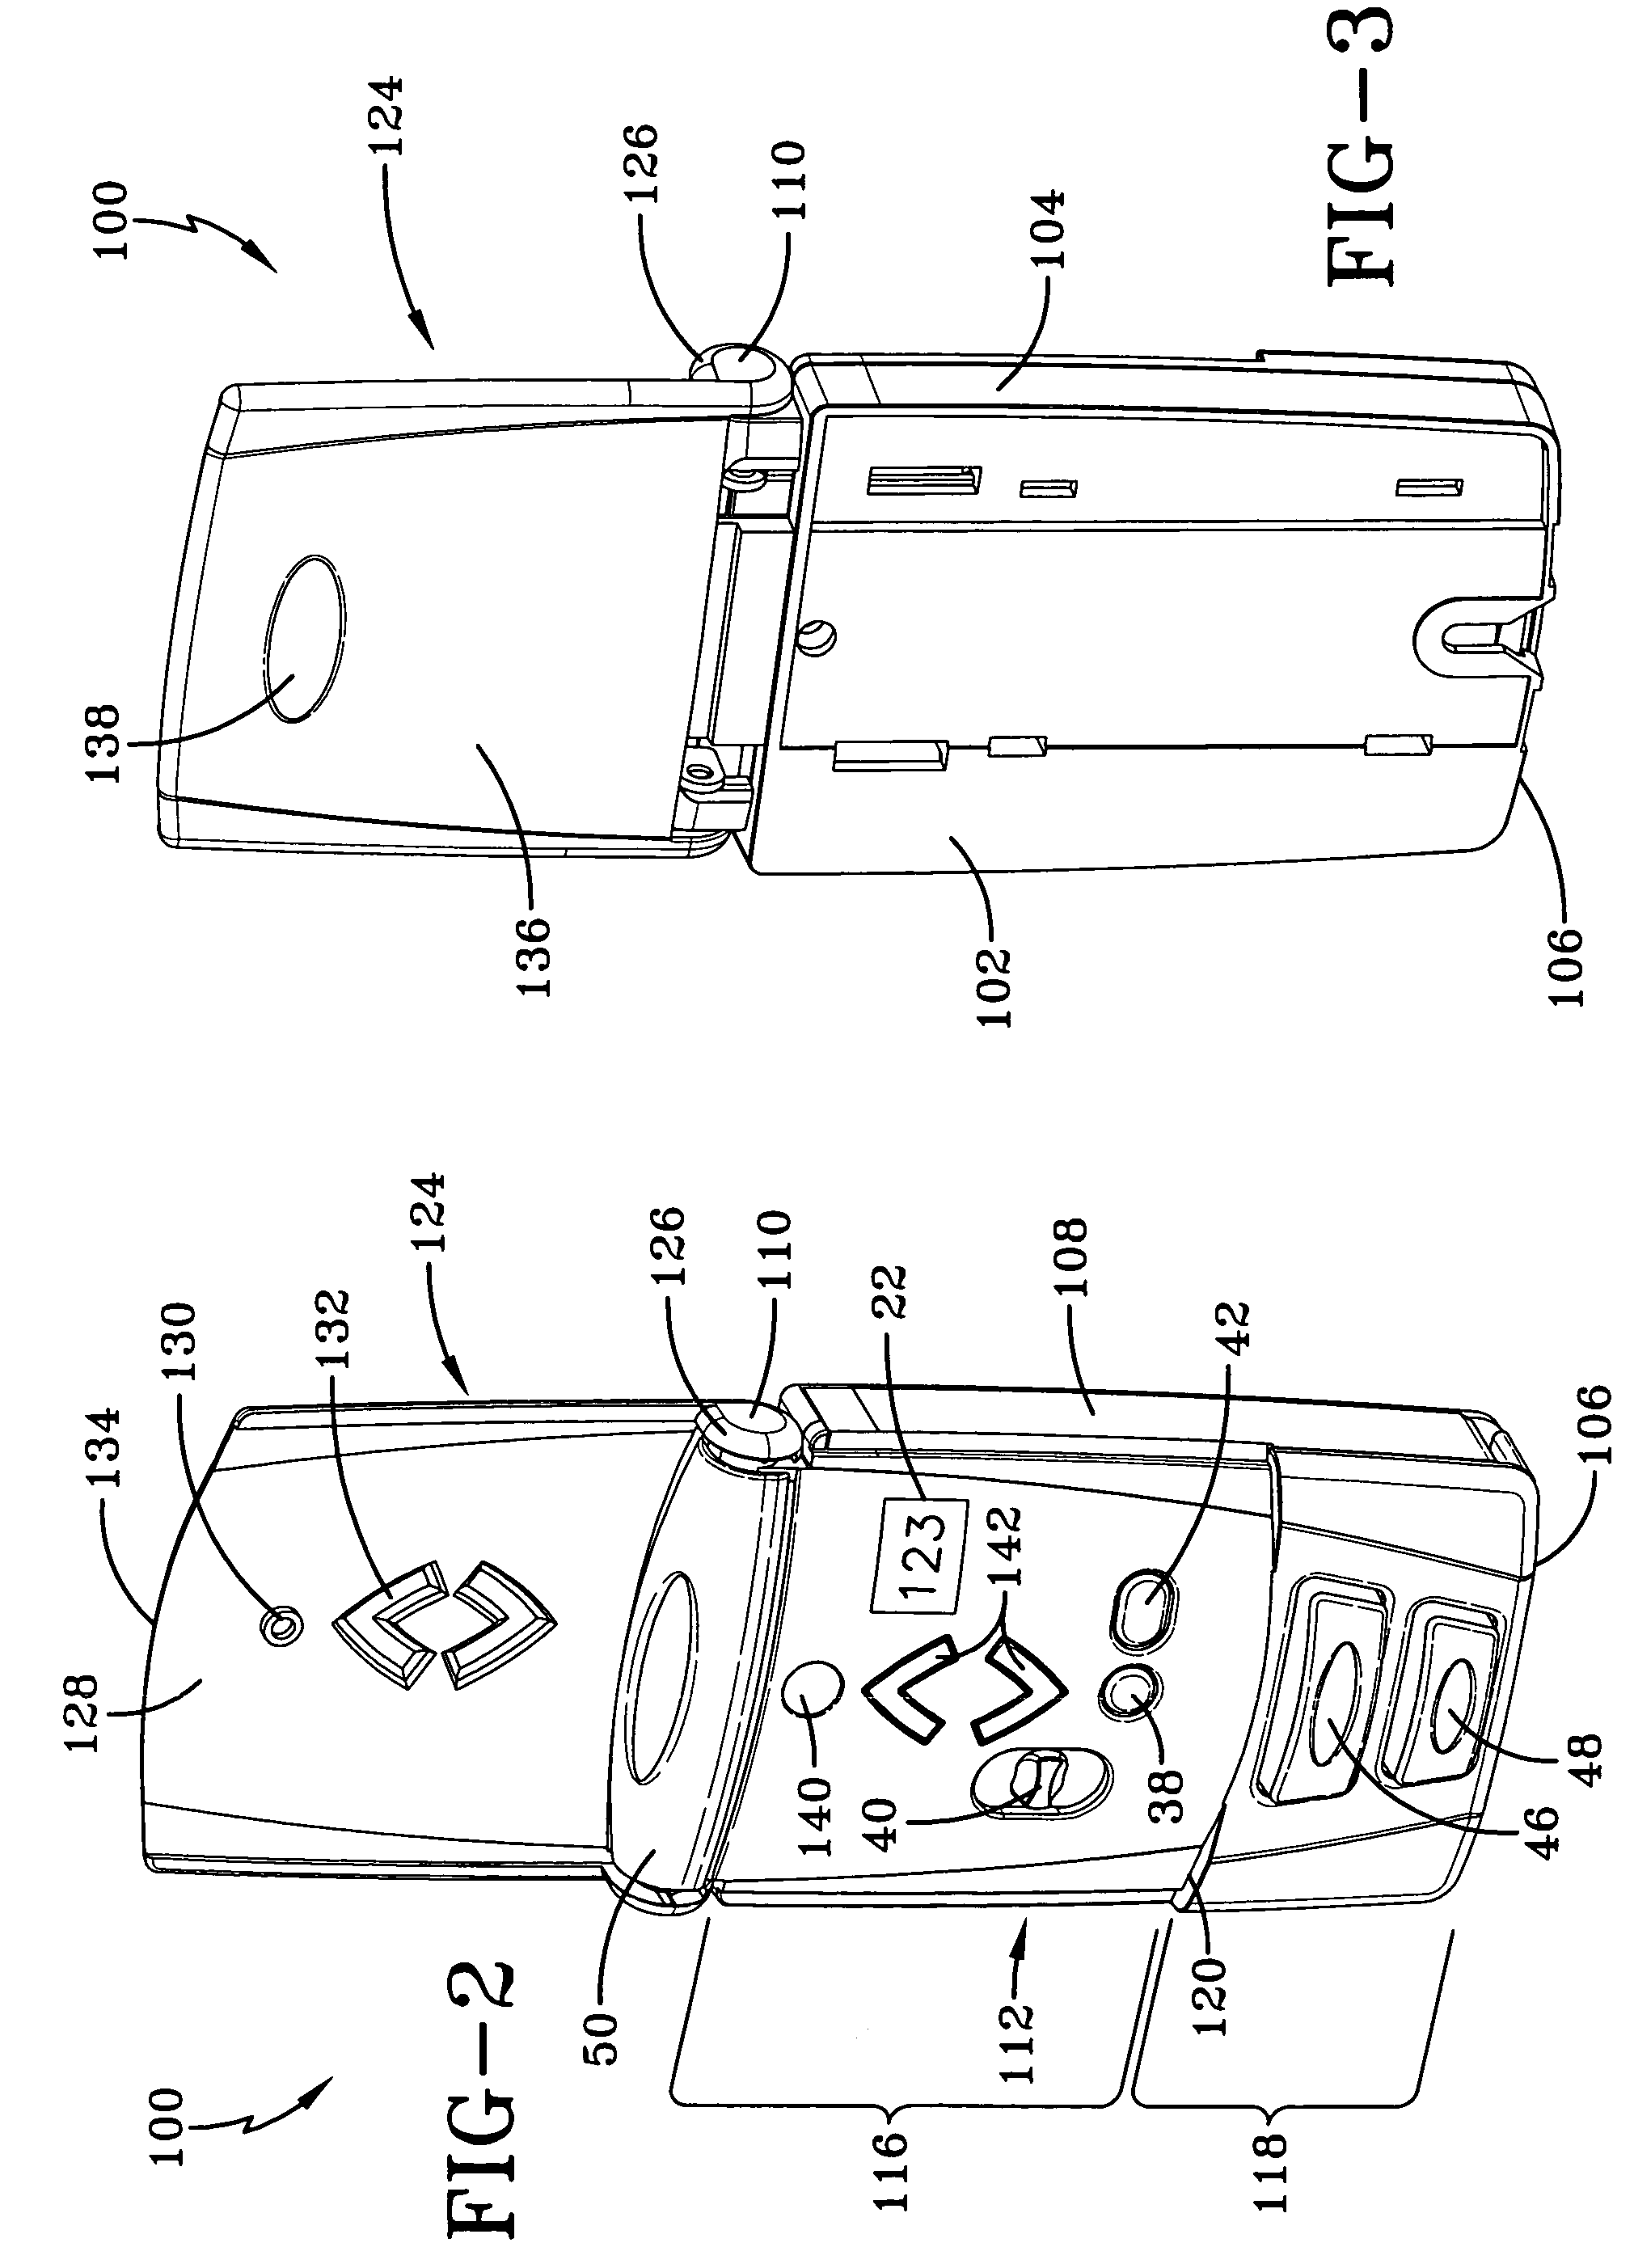 Operating system for a motorized barrier operator